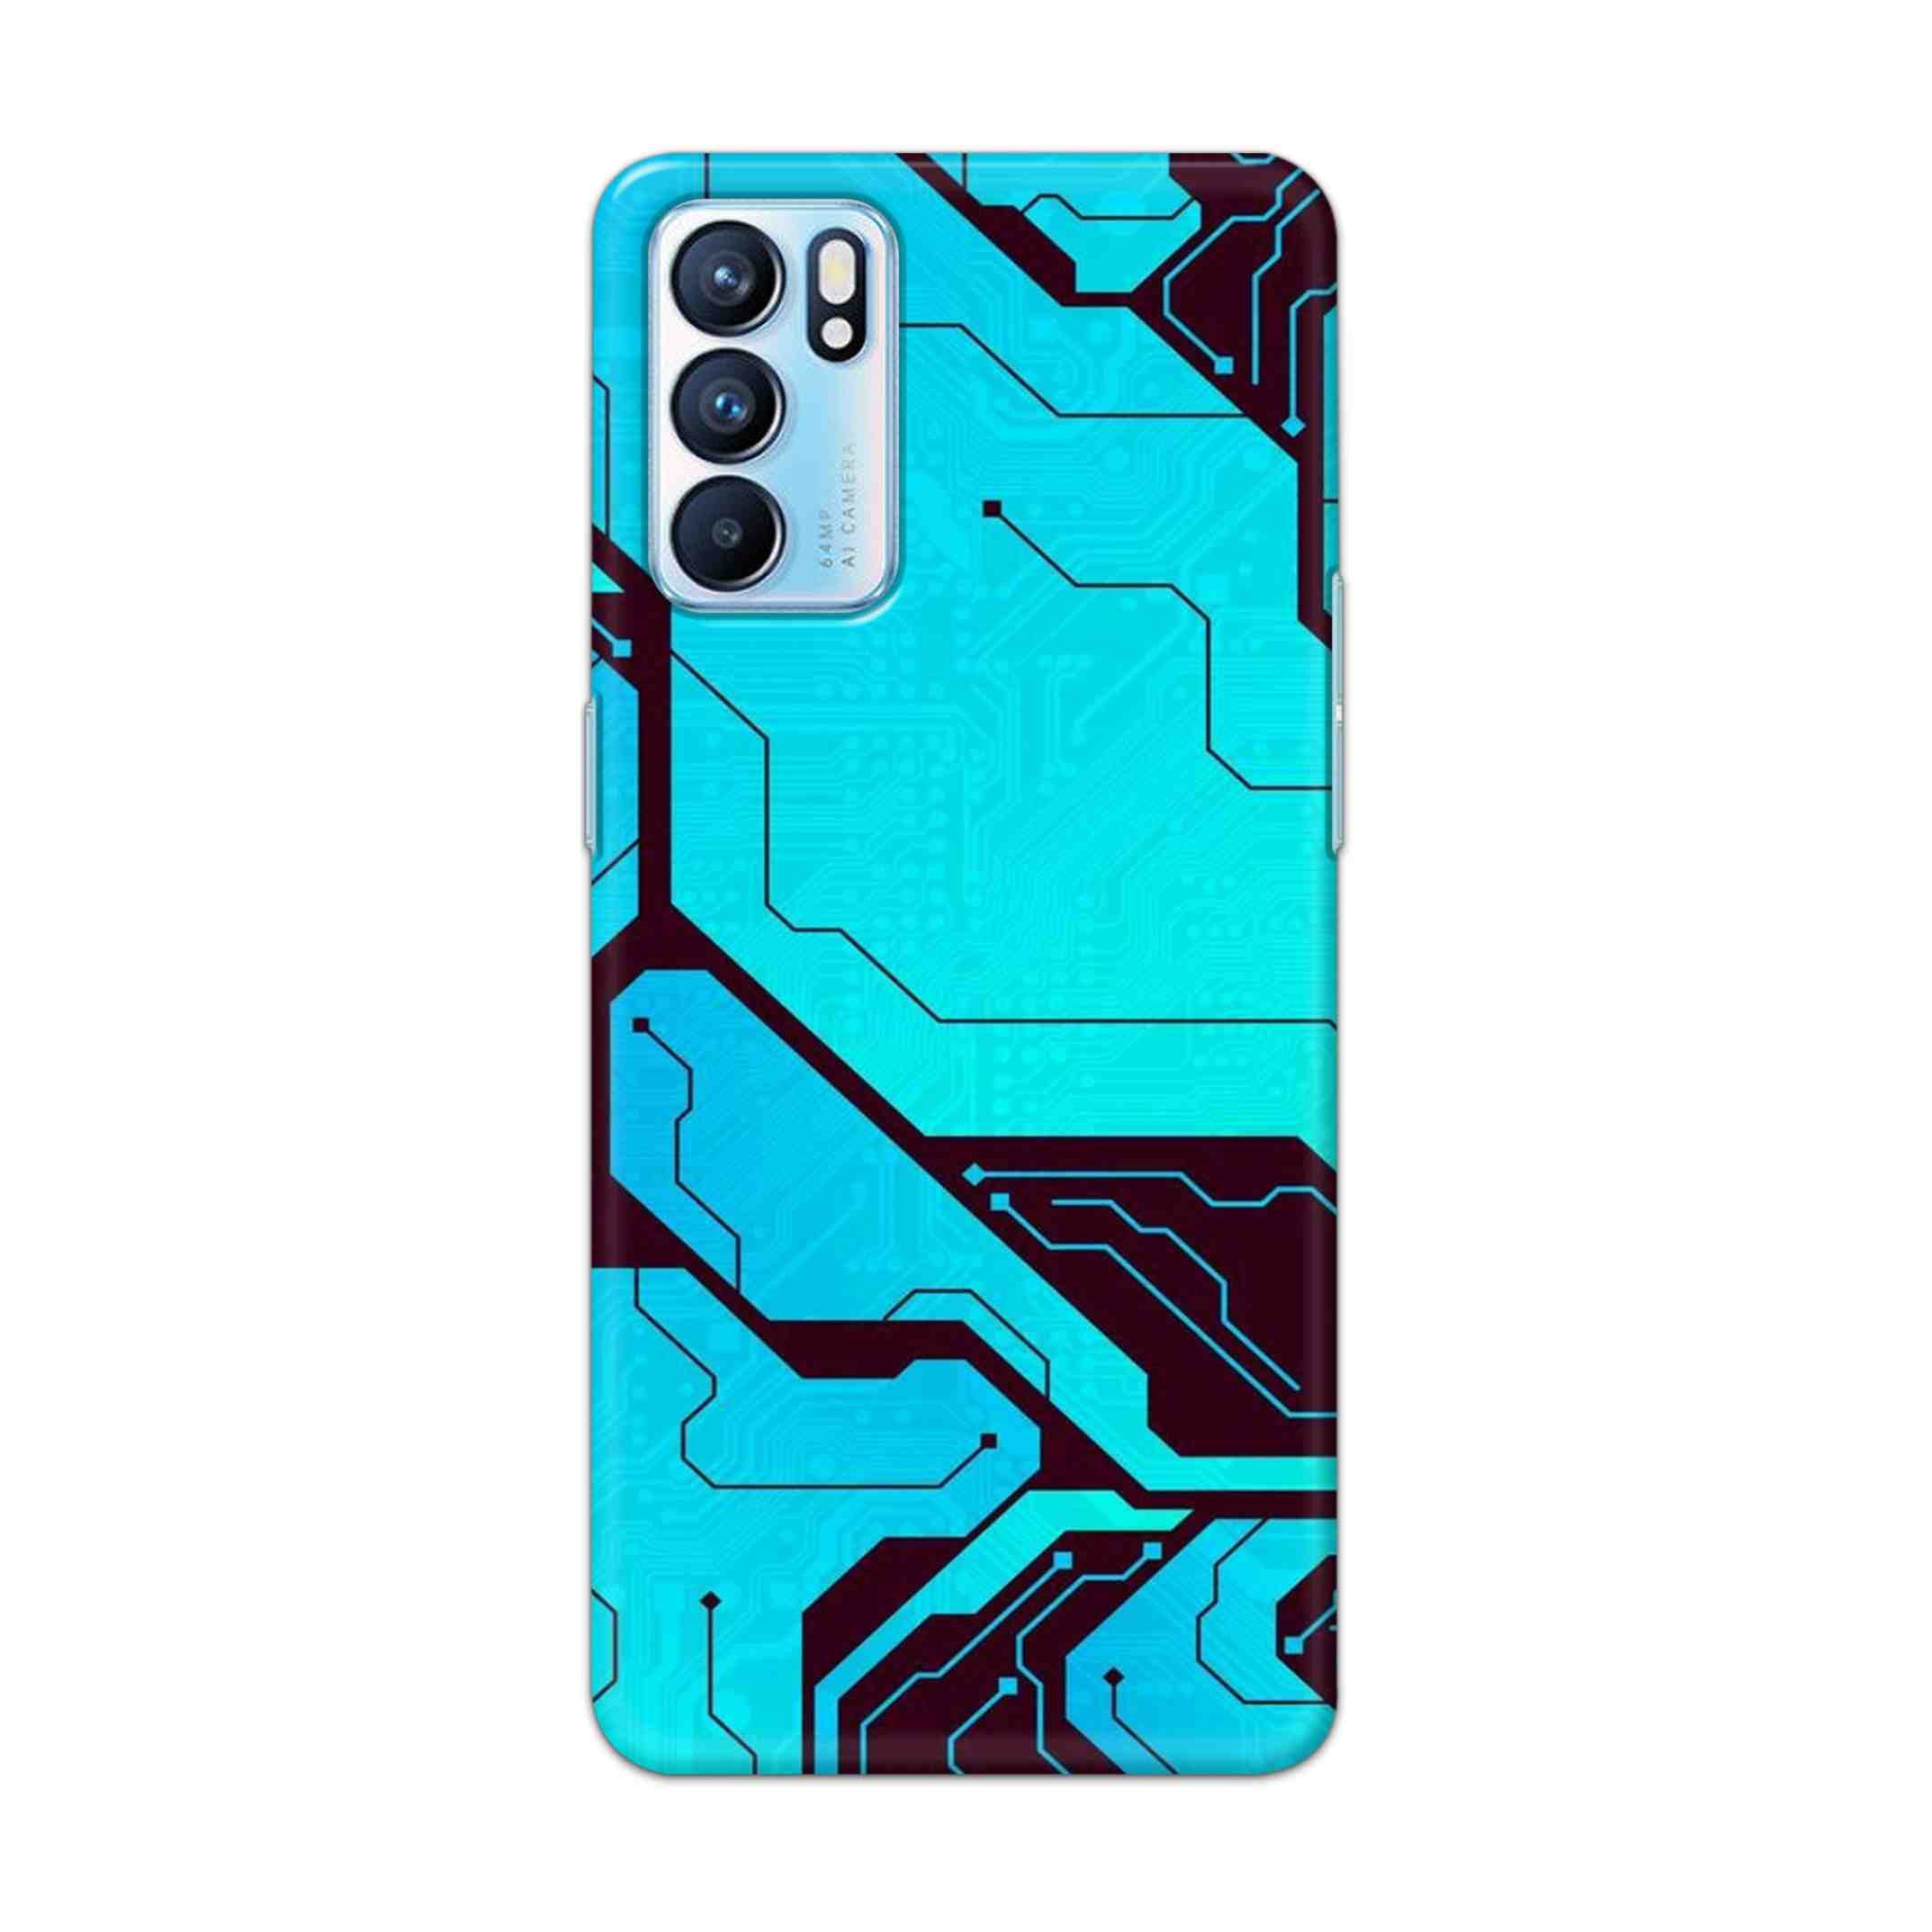 Buy Futuristic Line Hard Back Mobile Phone Case Cover For OPPO RENO 6 Online